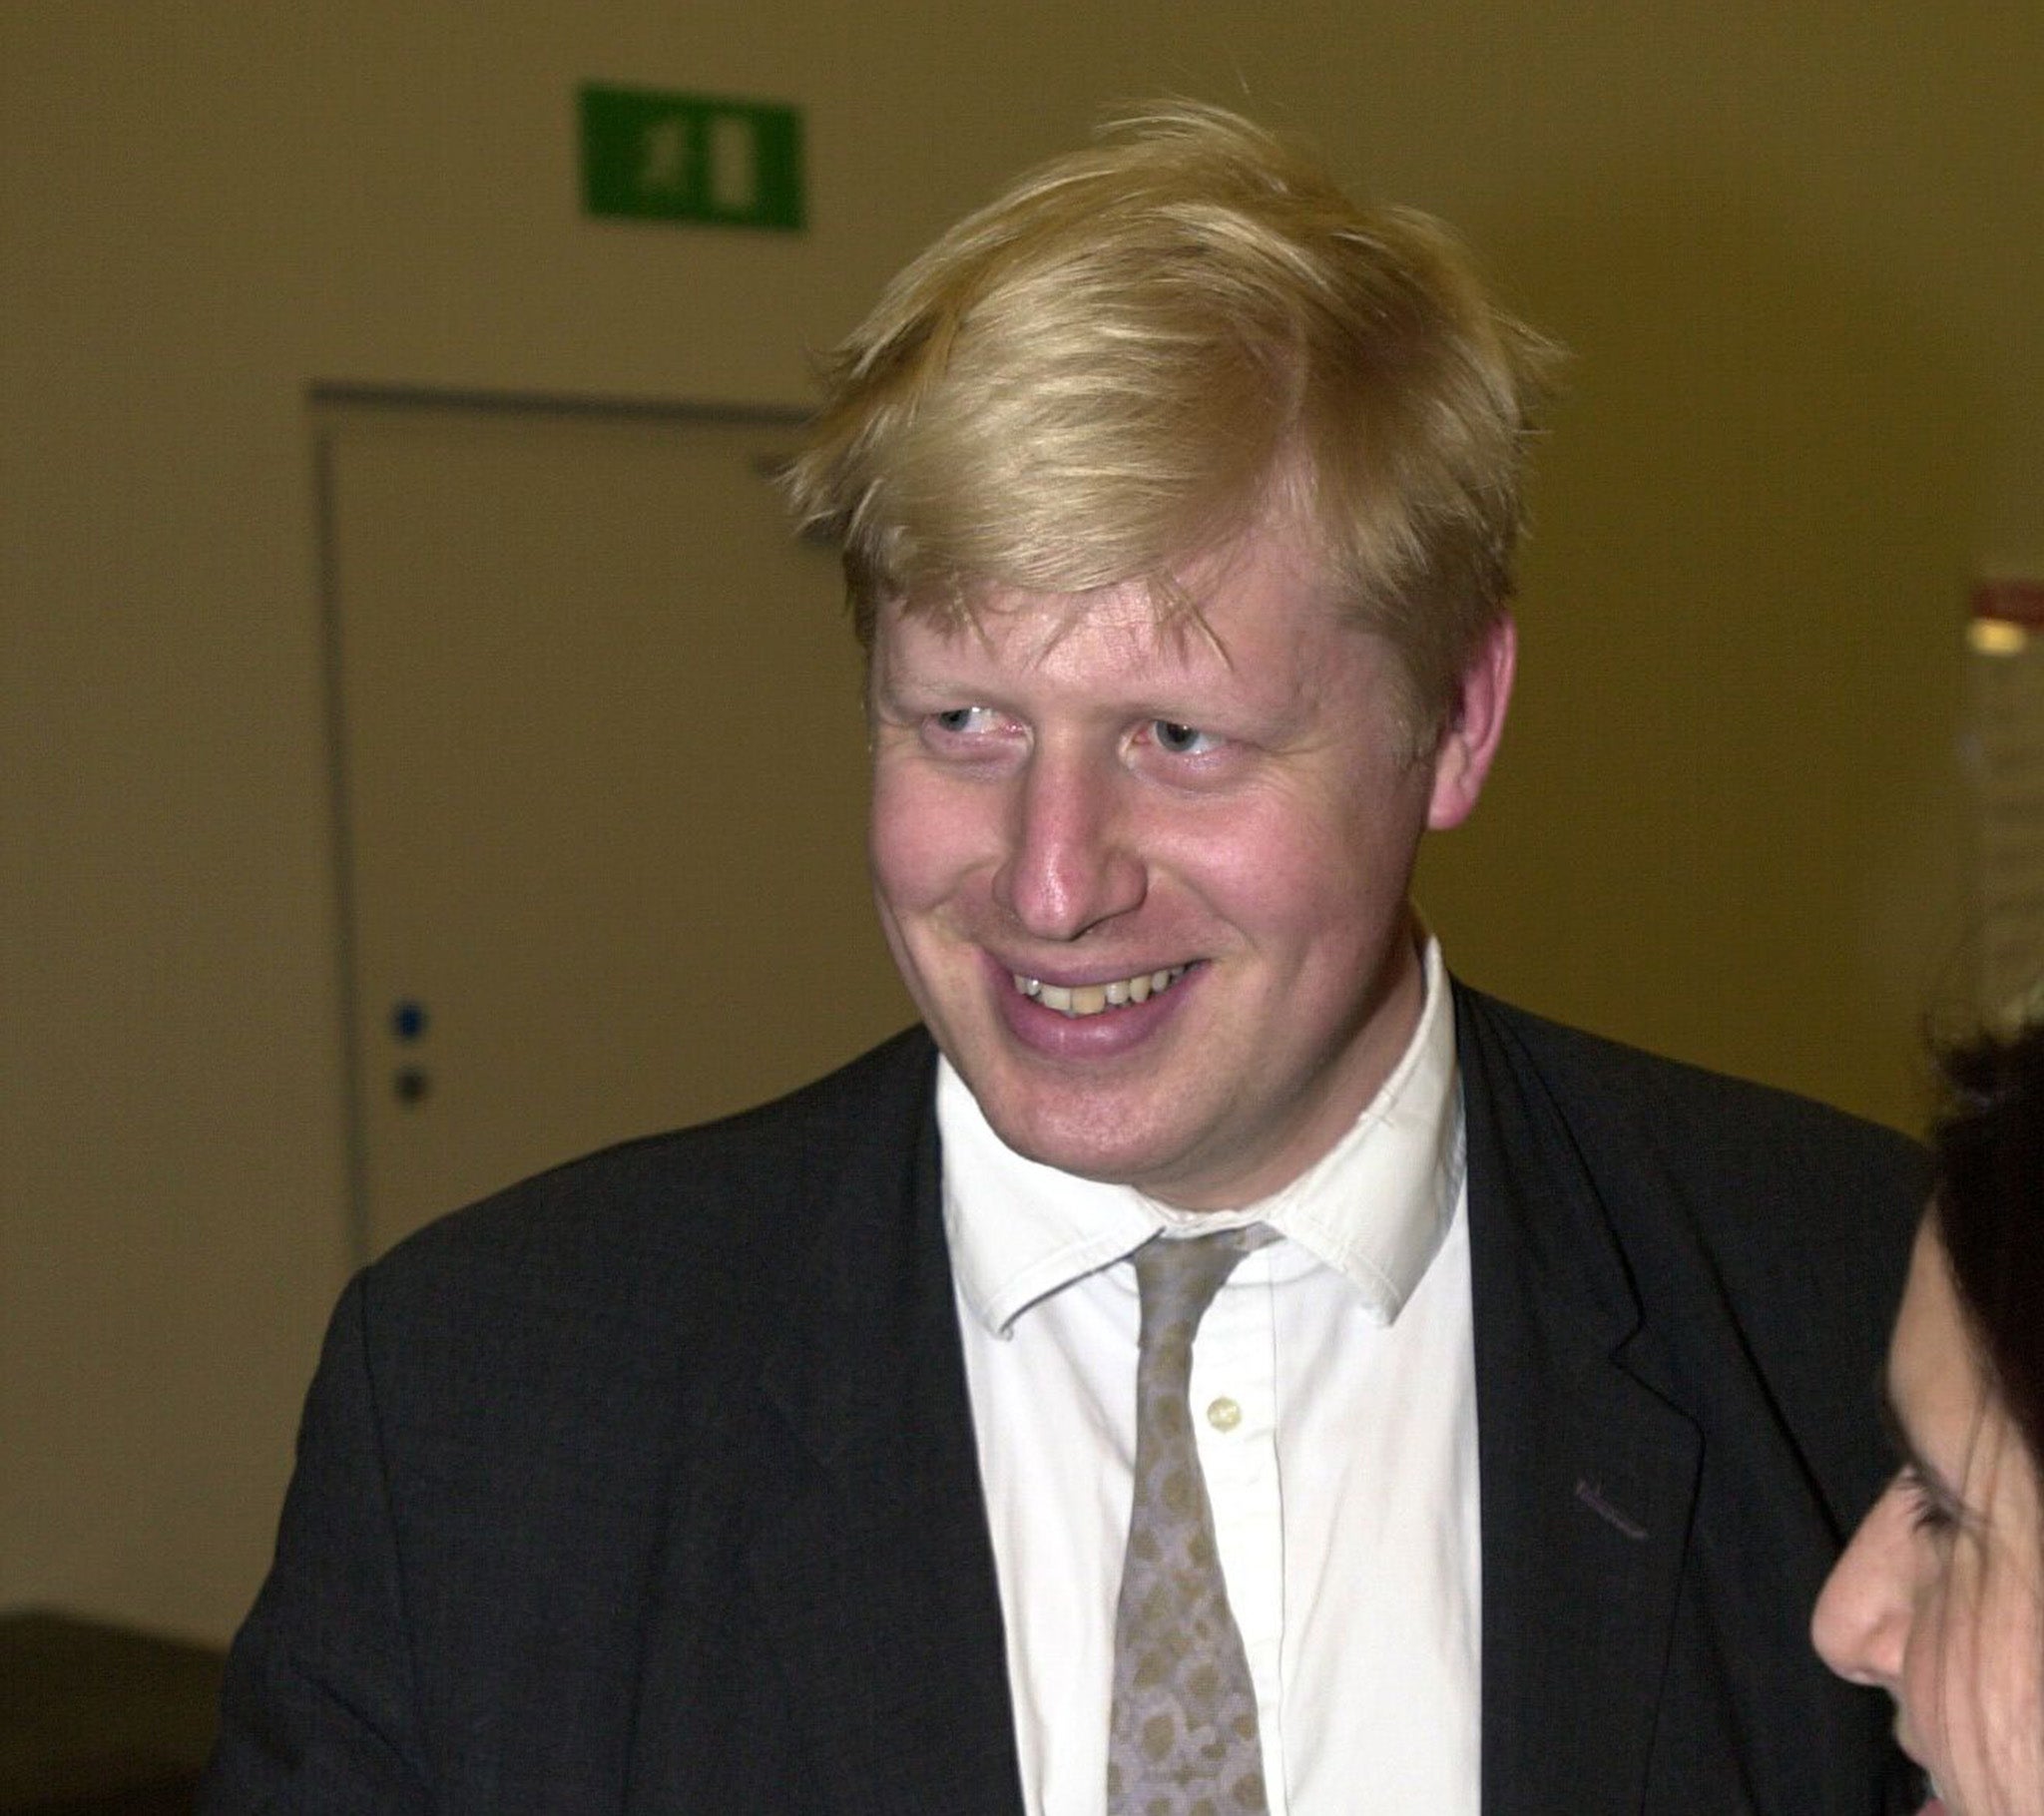 Johnson was a journalist before he was elected as a Tory MP